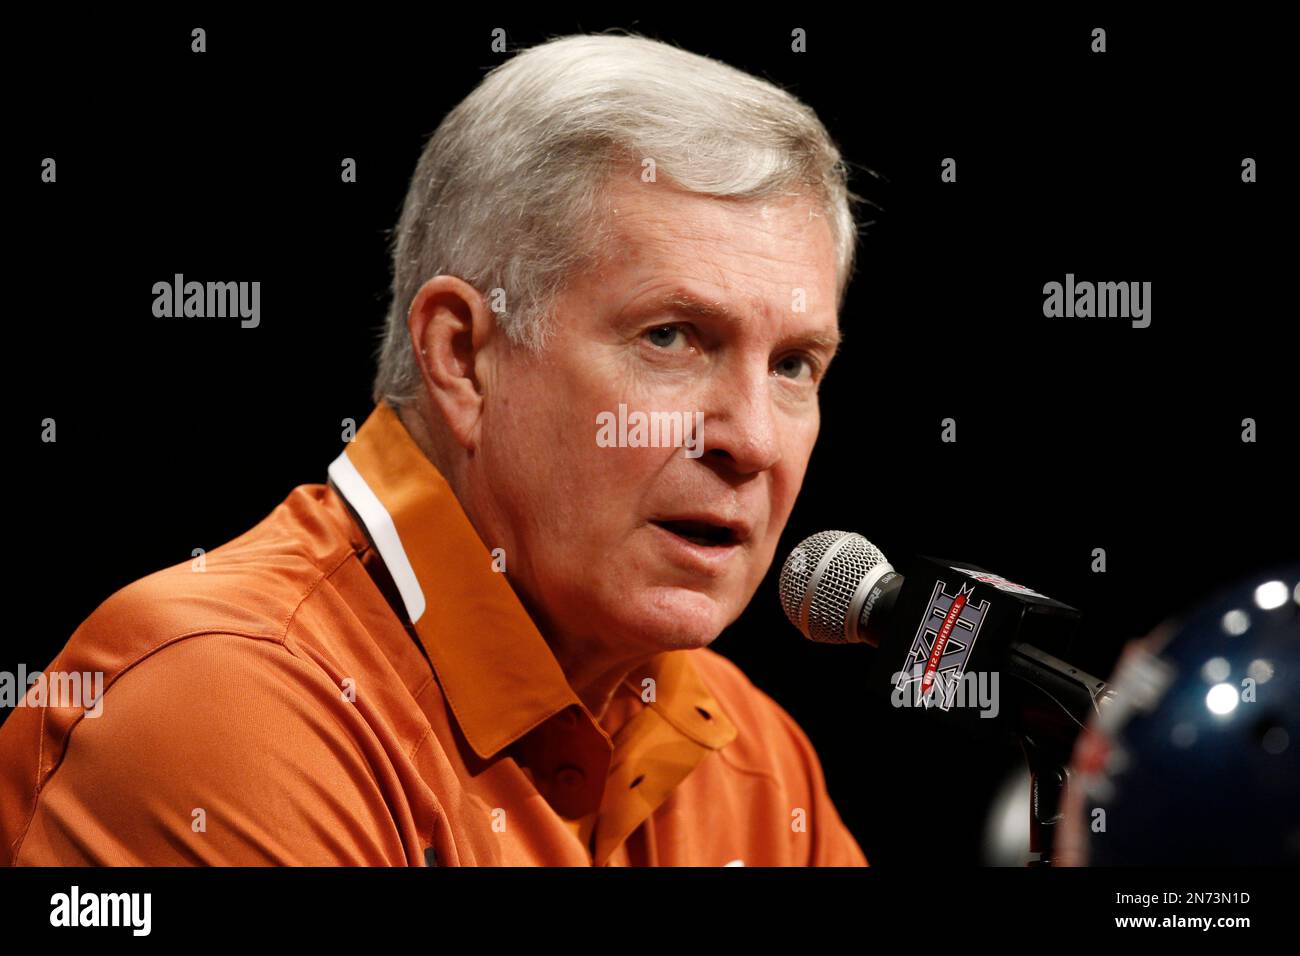 Texas football coach Mack Brown addresses the media during the NCAA college Big 12 Conference Football Media Days Tuesday, July 23, 2013 in Dallas. (AP Photo/Tim Sharp) Stock Photo